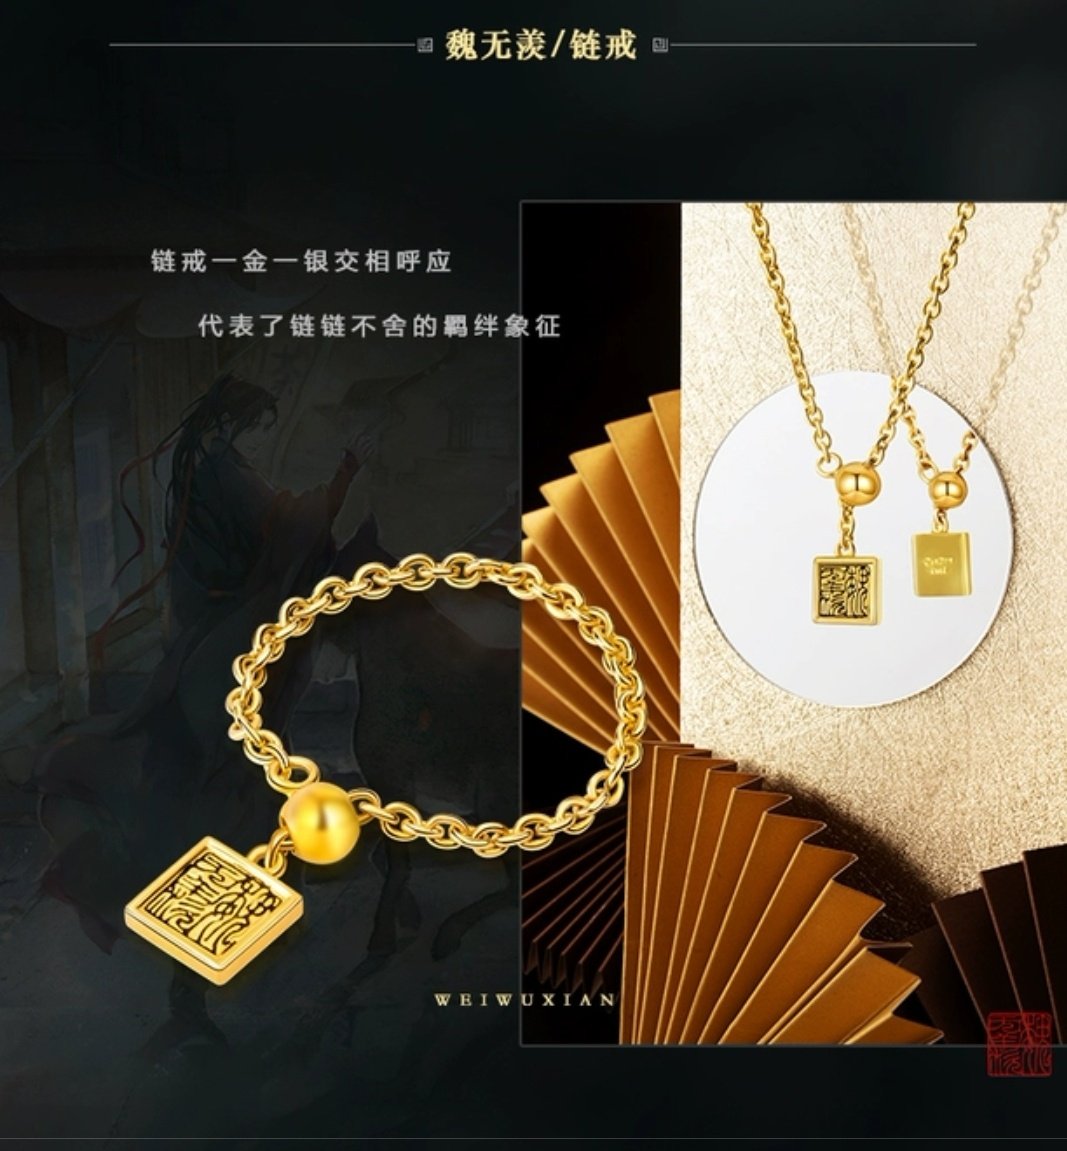  MDZS x MENG JEWELLERY UPDATE #20MENG JEWELLERY IS BACK WITH WANGXIAN CHAINED RINGS  AND THEY'RE ADJUSTABLE ITS THEIR NAMES ENGRAVED ON THE RINGS  https://m.tb.cn/h.VU9vzpH?sm=39e6b6 #MDZS  #WeiWuxian  #LanWangji  #WangXian  #魔道祖师  #魏无羡  #蓝忘机  #忘羡